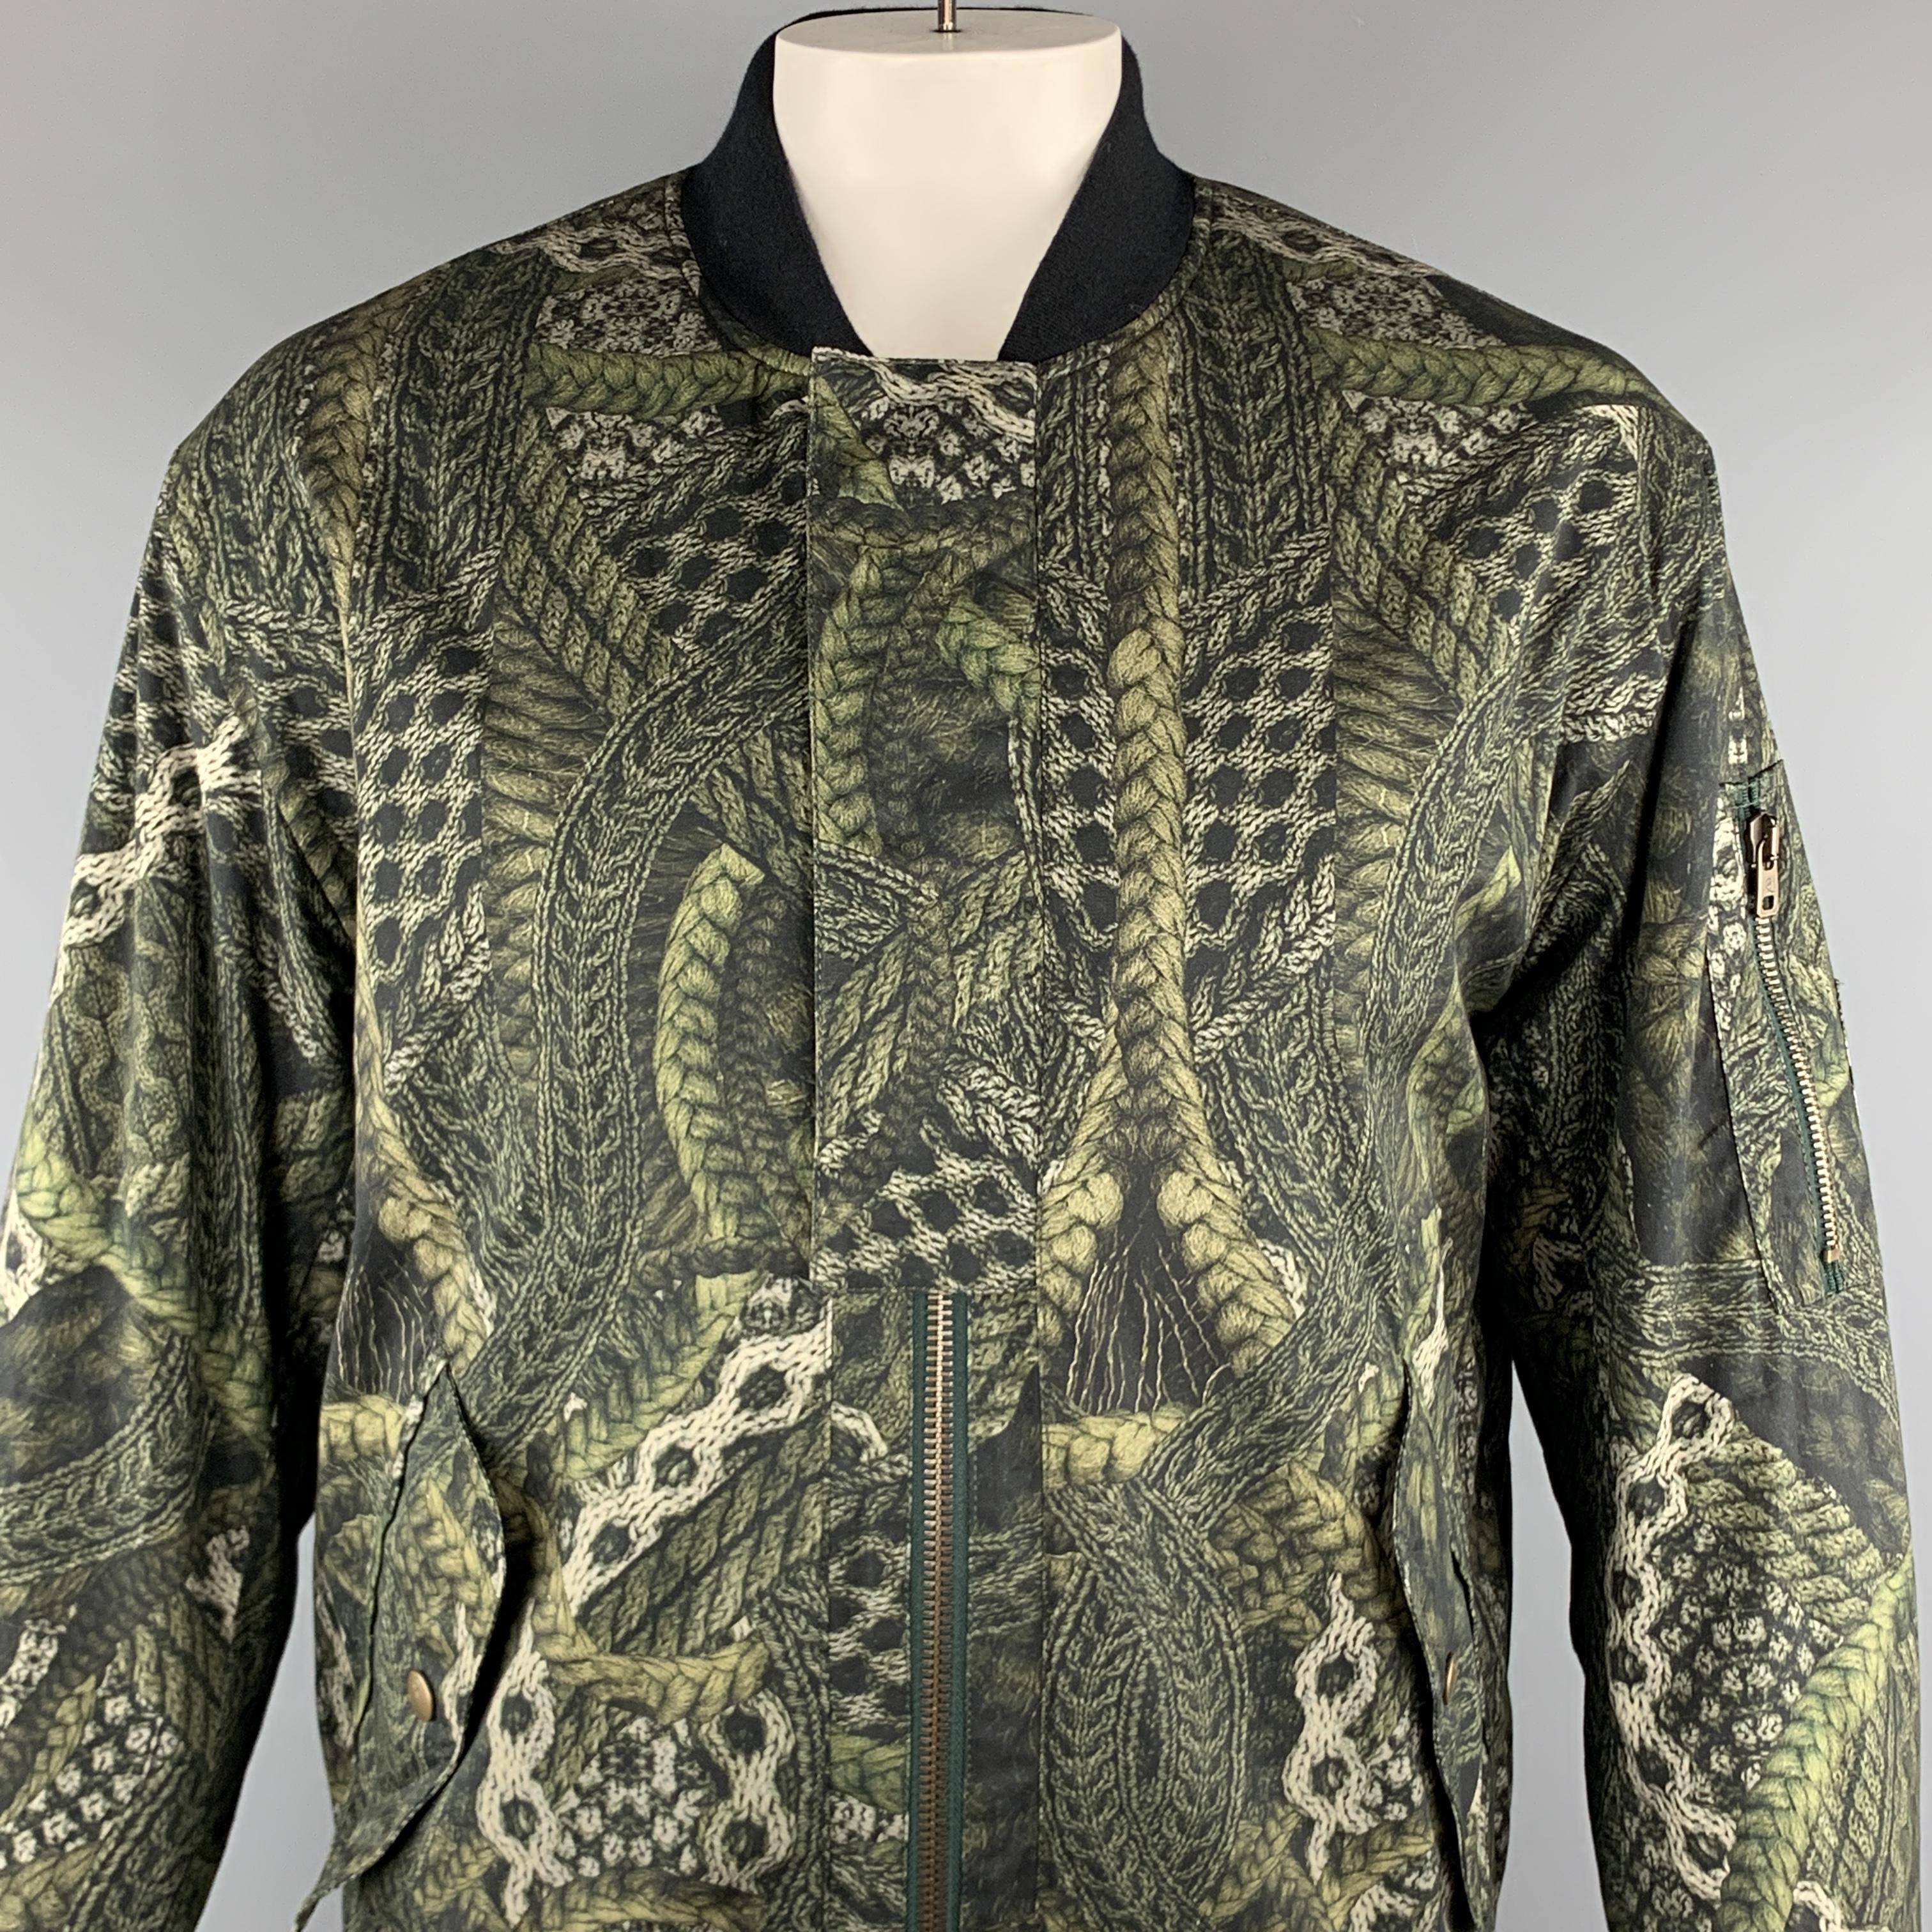 MCQ by ALEXANDER MCQUEEN Jacket comes in a olive print cotton / elastane featuring a bomber style, sleeve patch pocket details, and a full zip closure. Made in Romania

Excellent Pre-Owned Condition.
Marked: IT 56

Measurements:

Shoulder: 21.5 in.